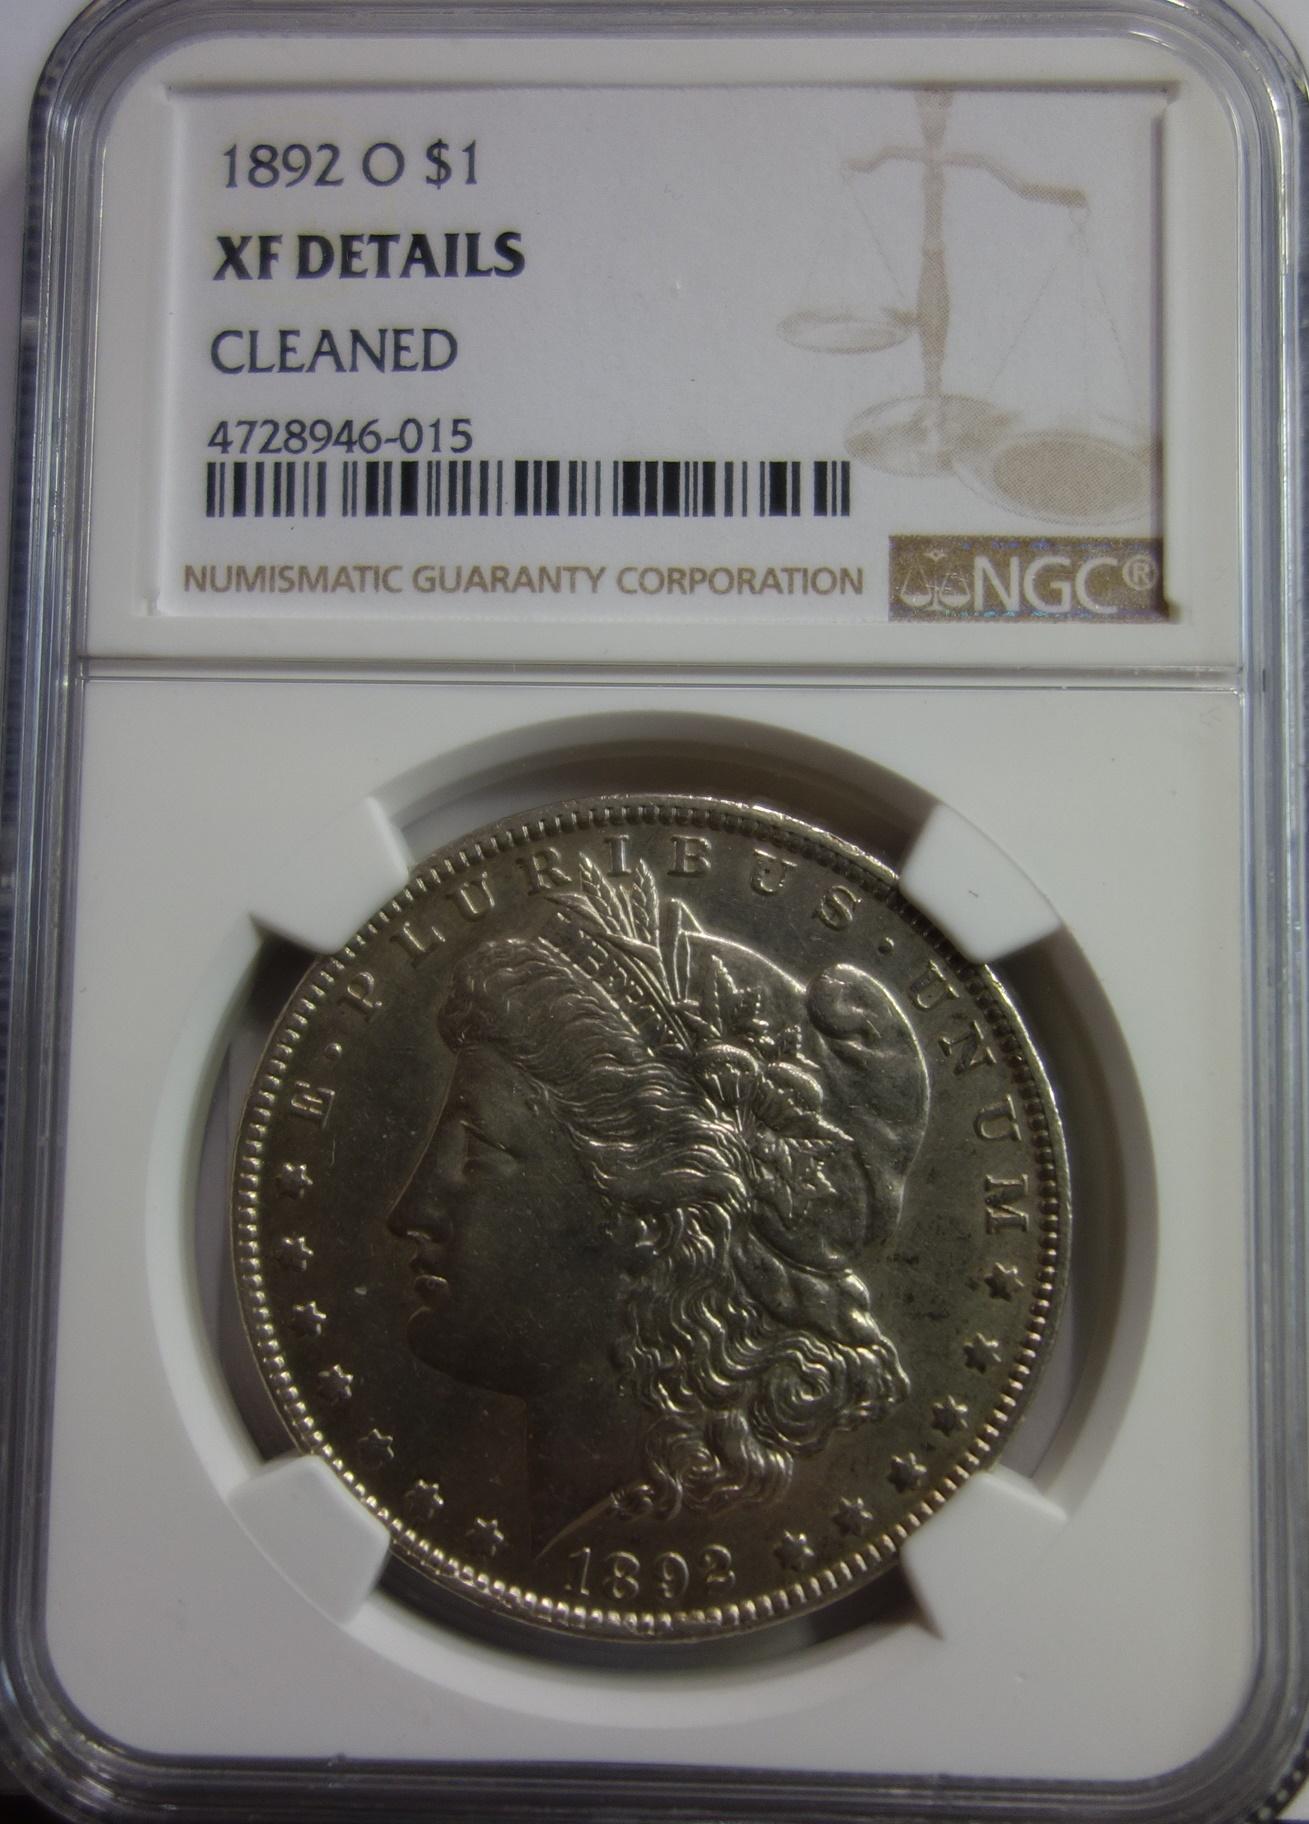 NGC GRADED XF DETAILS, CLEANED, 1892-O MORGAN SILVER DOLLAR